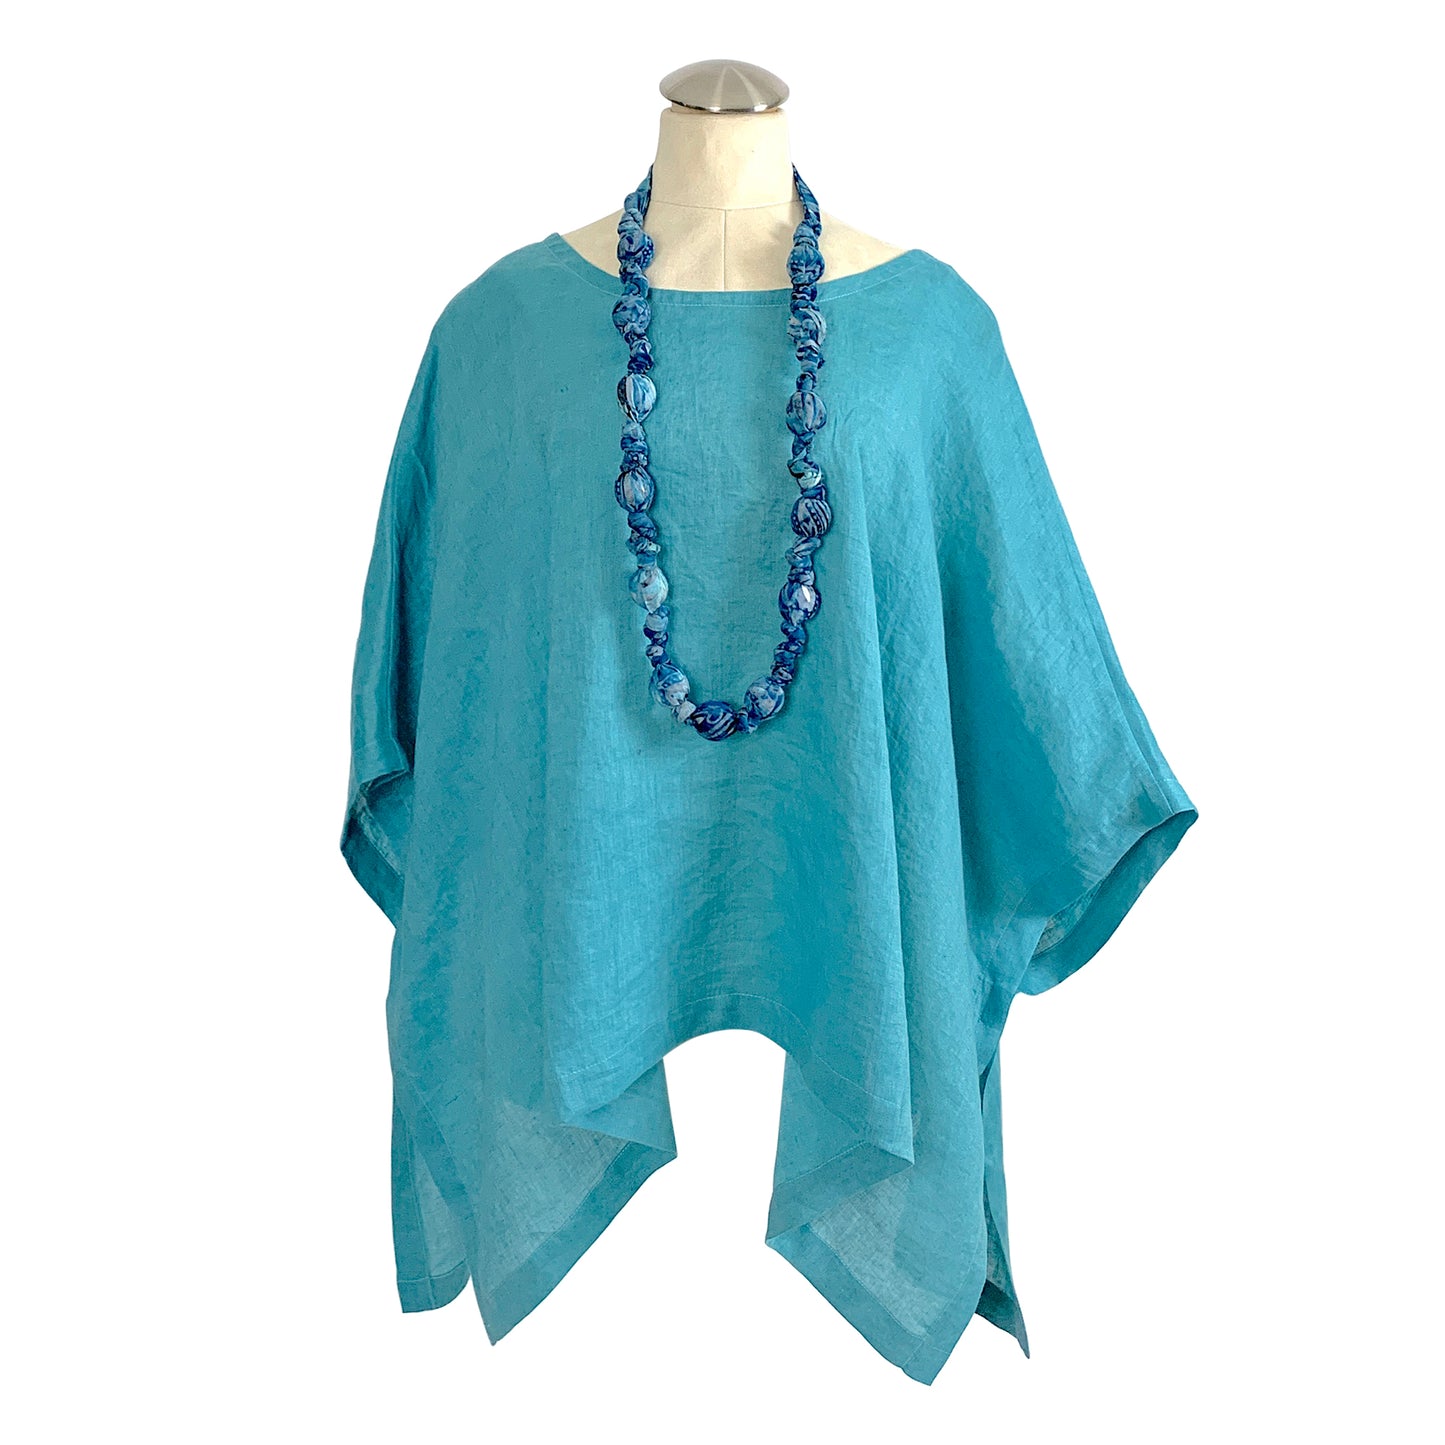 Willow Top: Hand dyed linen in Teal